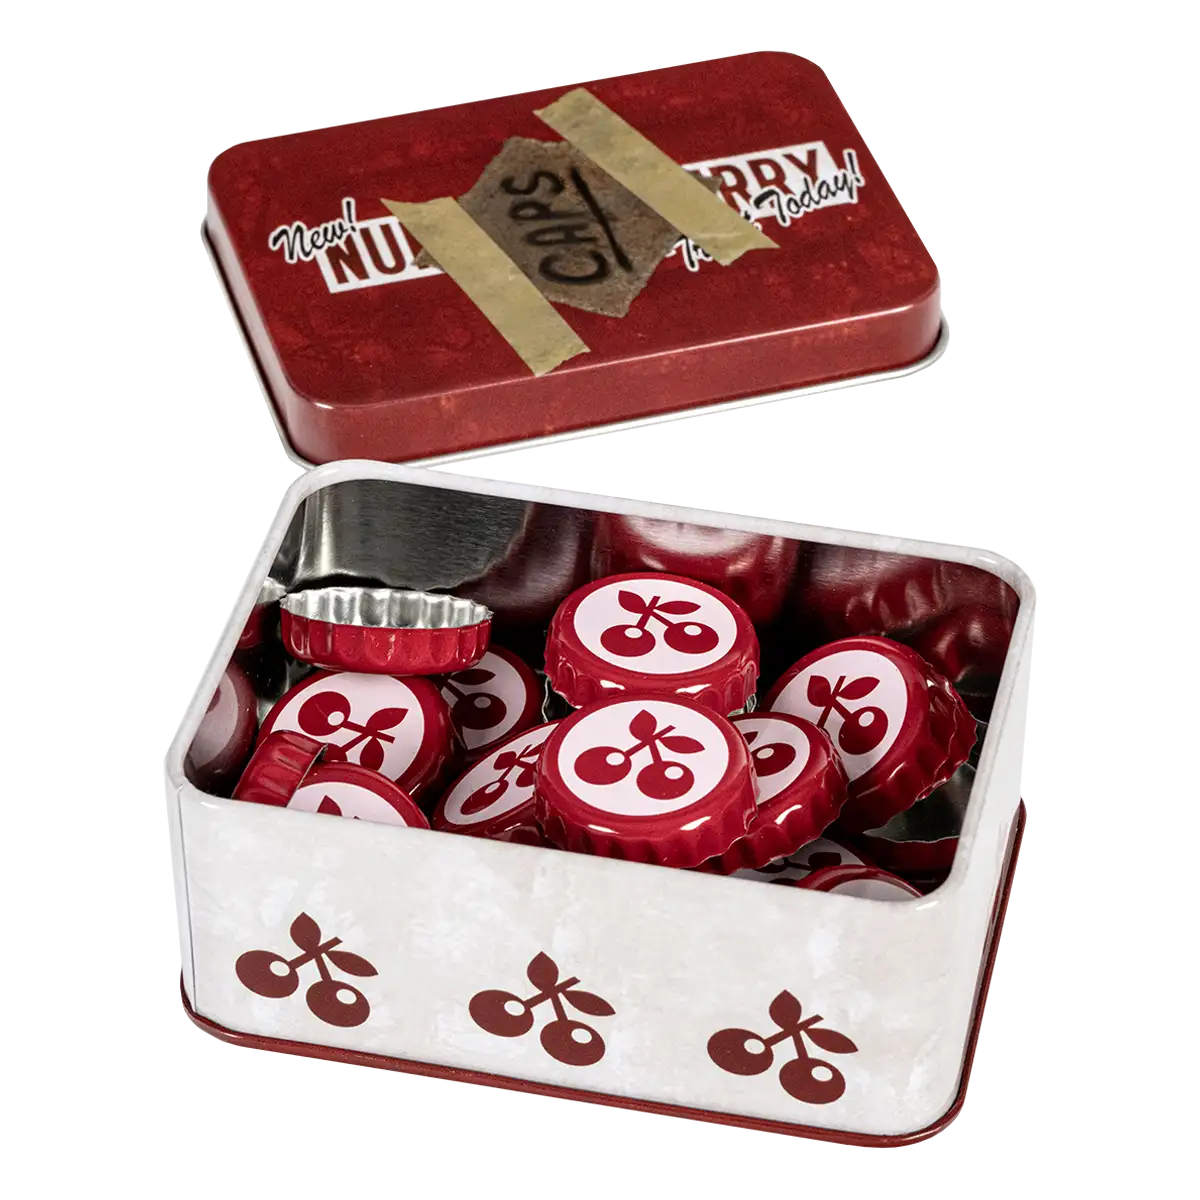 Fallout Bottle Cap Series "Nuka Cola Cherry" with Collection Tin